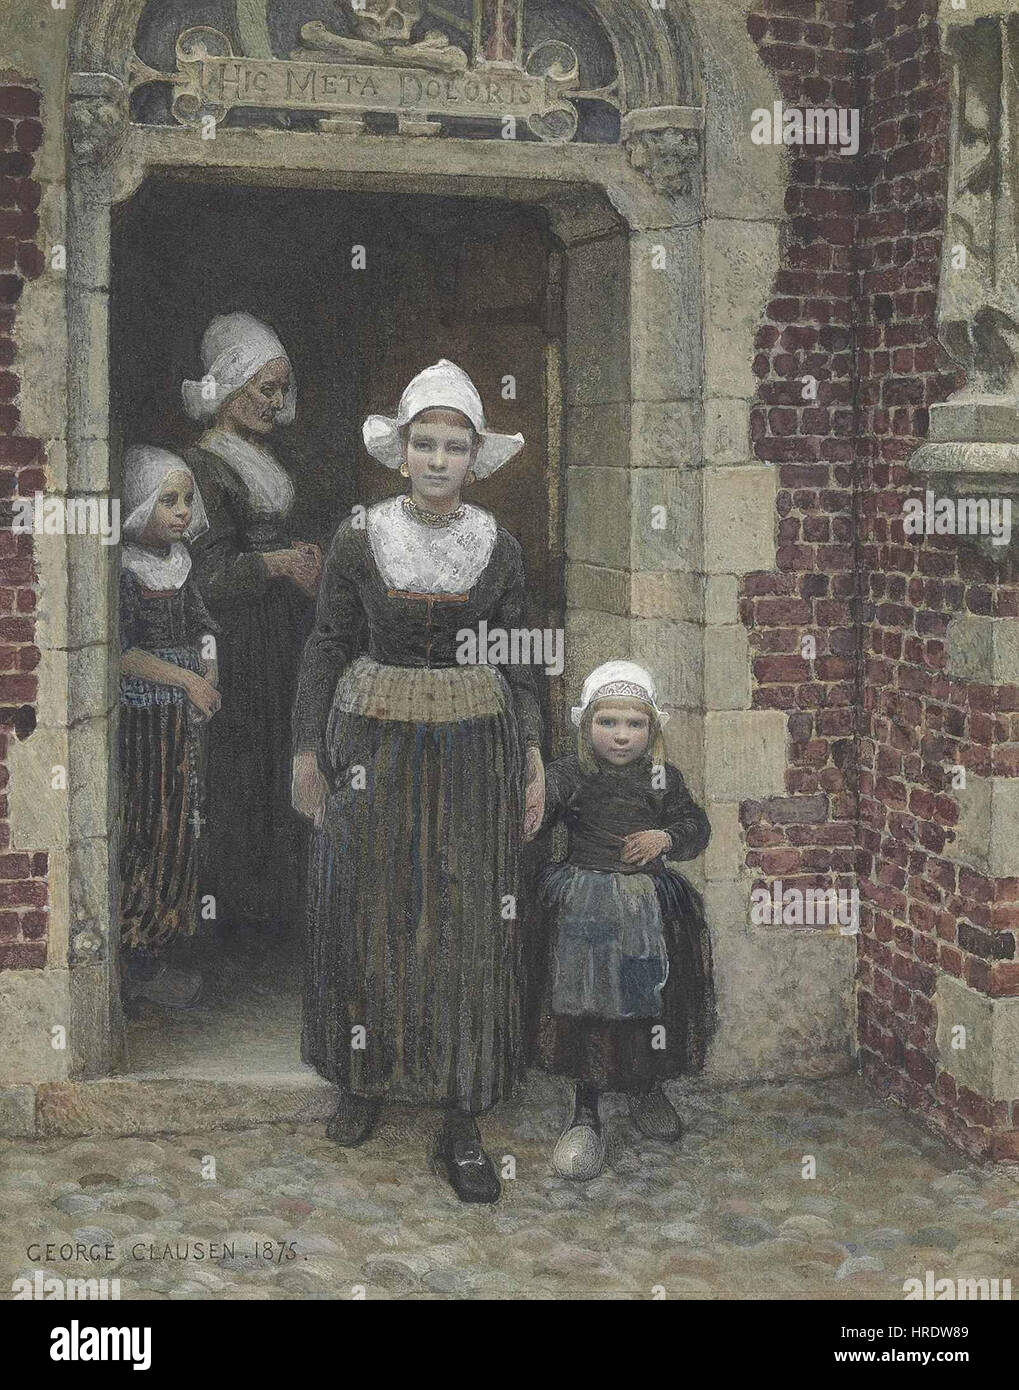 George Clausen - Coming out of church, Vollendam, Zuider Zee Stock Photo